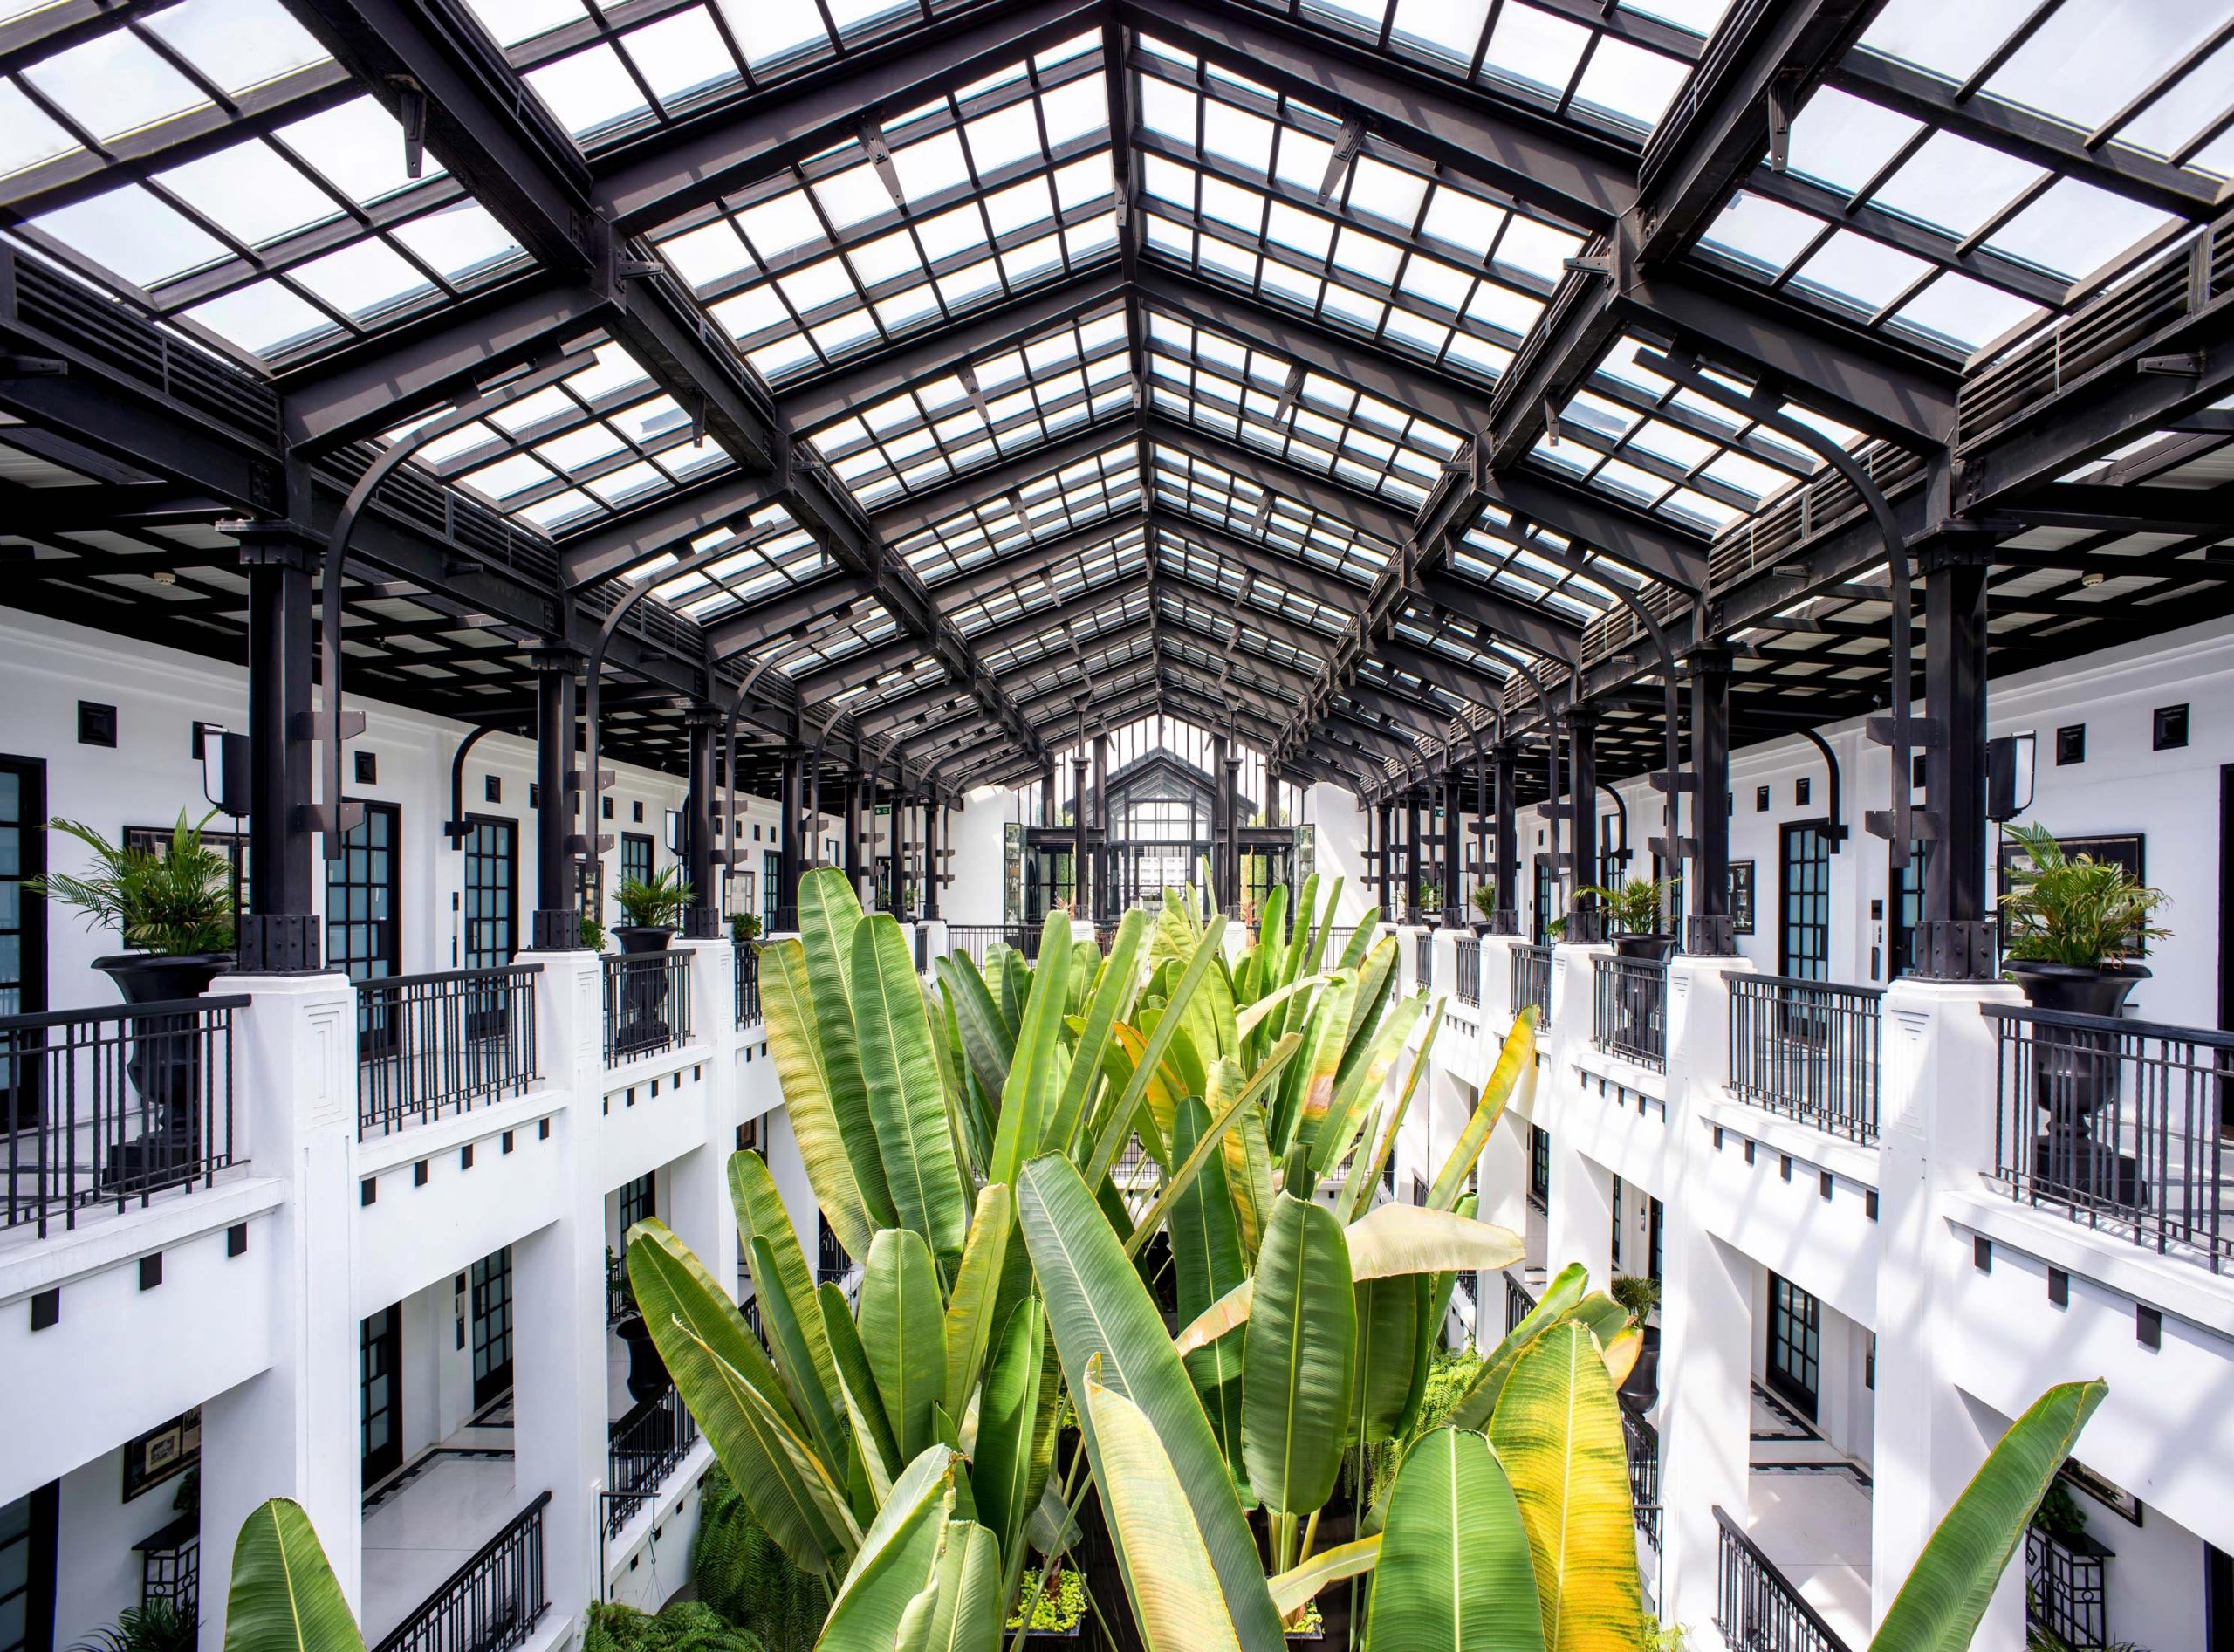 Aerial view of the glass ceiling courtyard at The Siam Hotel in Bangkok, featuring tall palm trees surrounded by balconies on multiple floors.